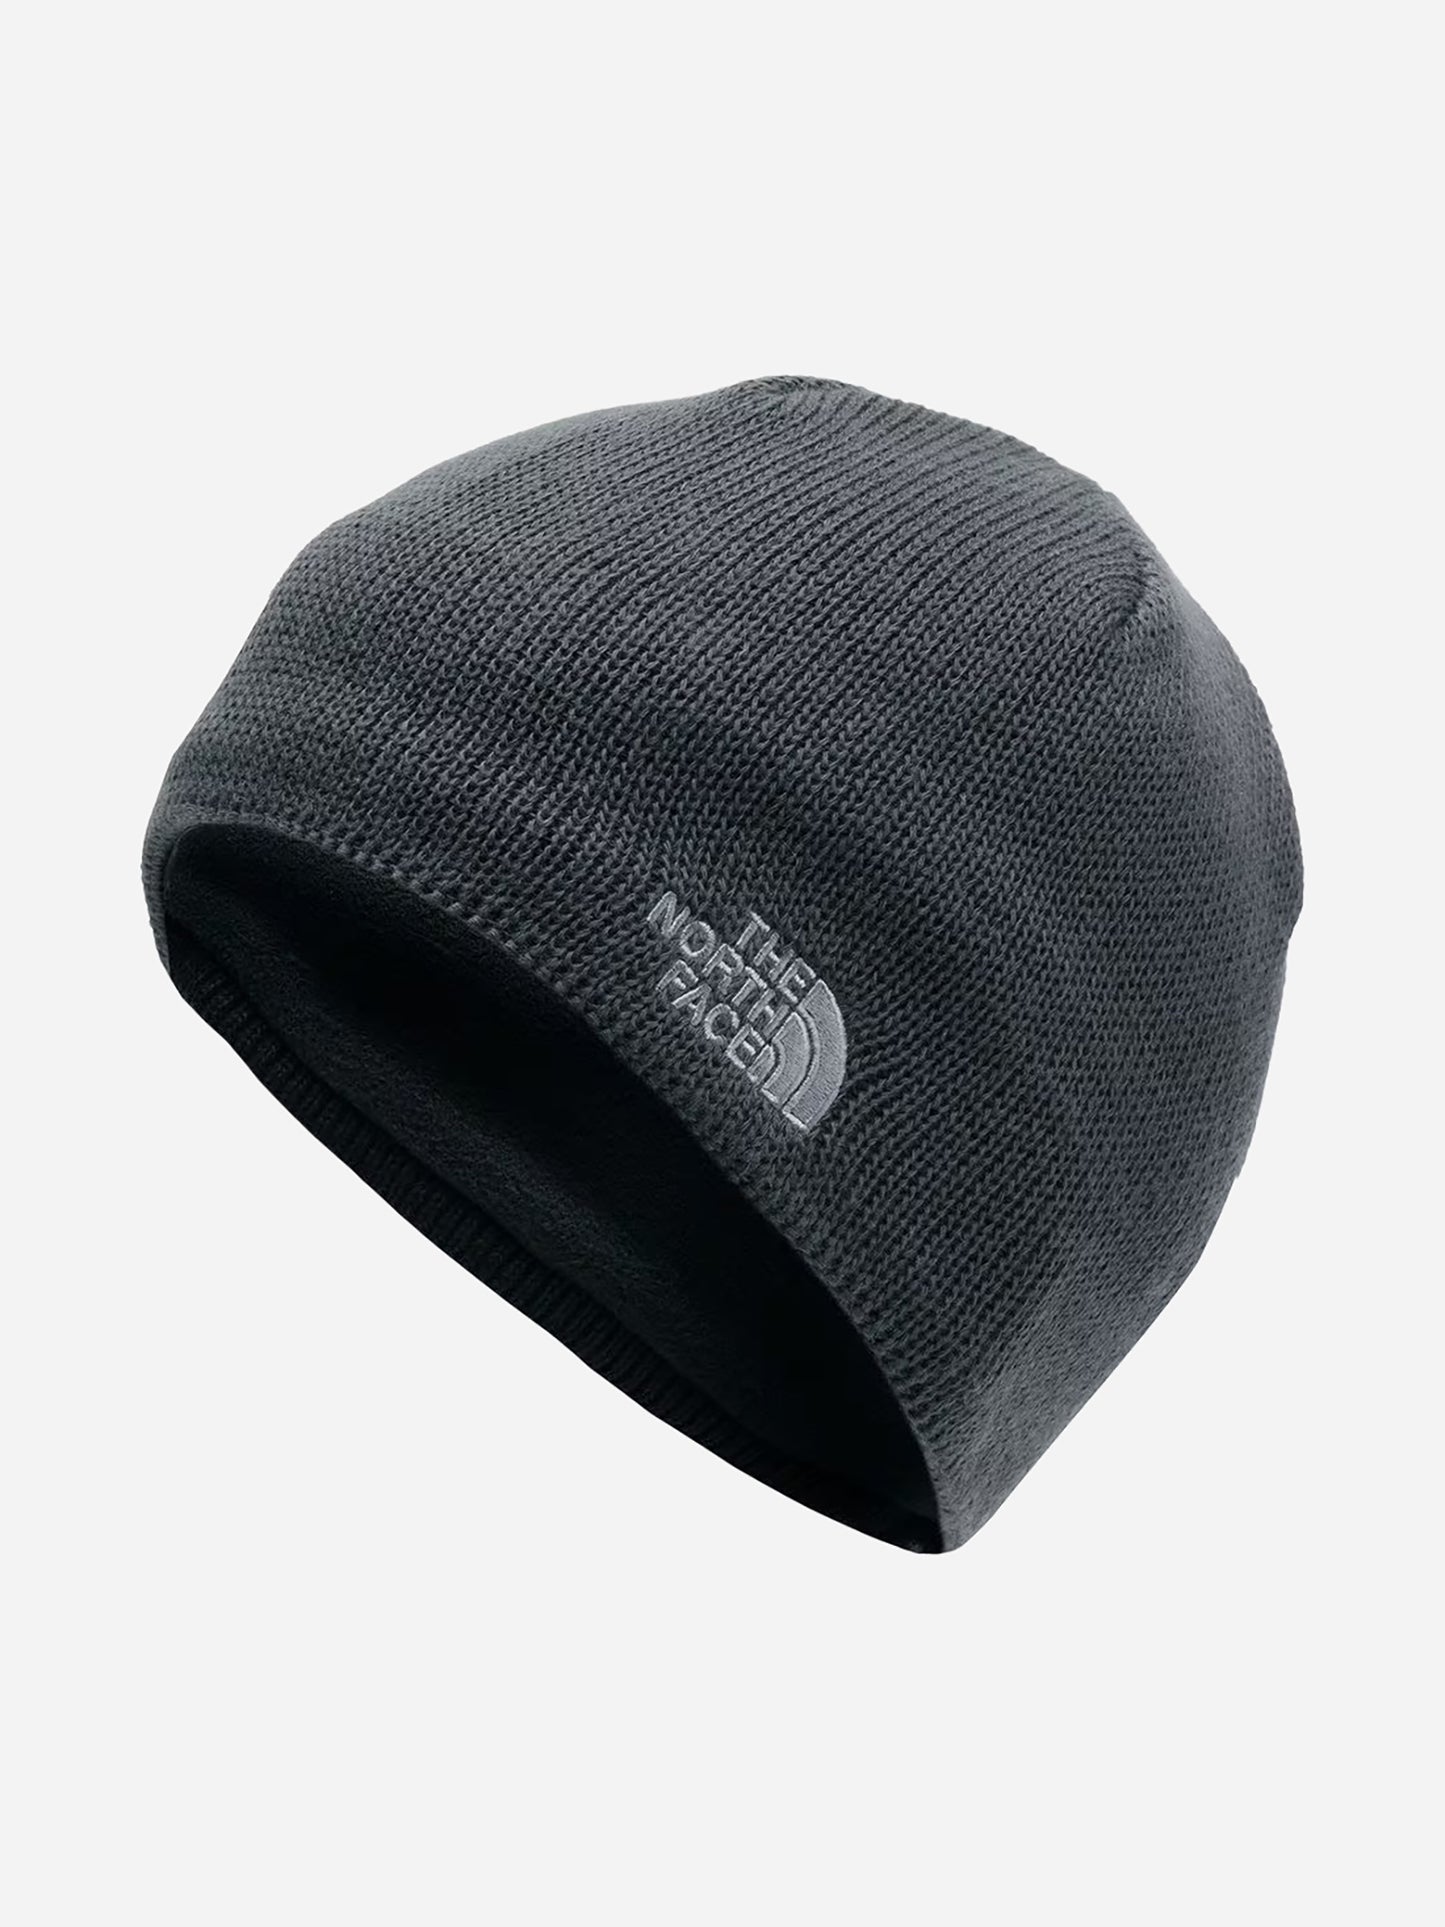 The North Face Men's Bones Recycled Beanie